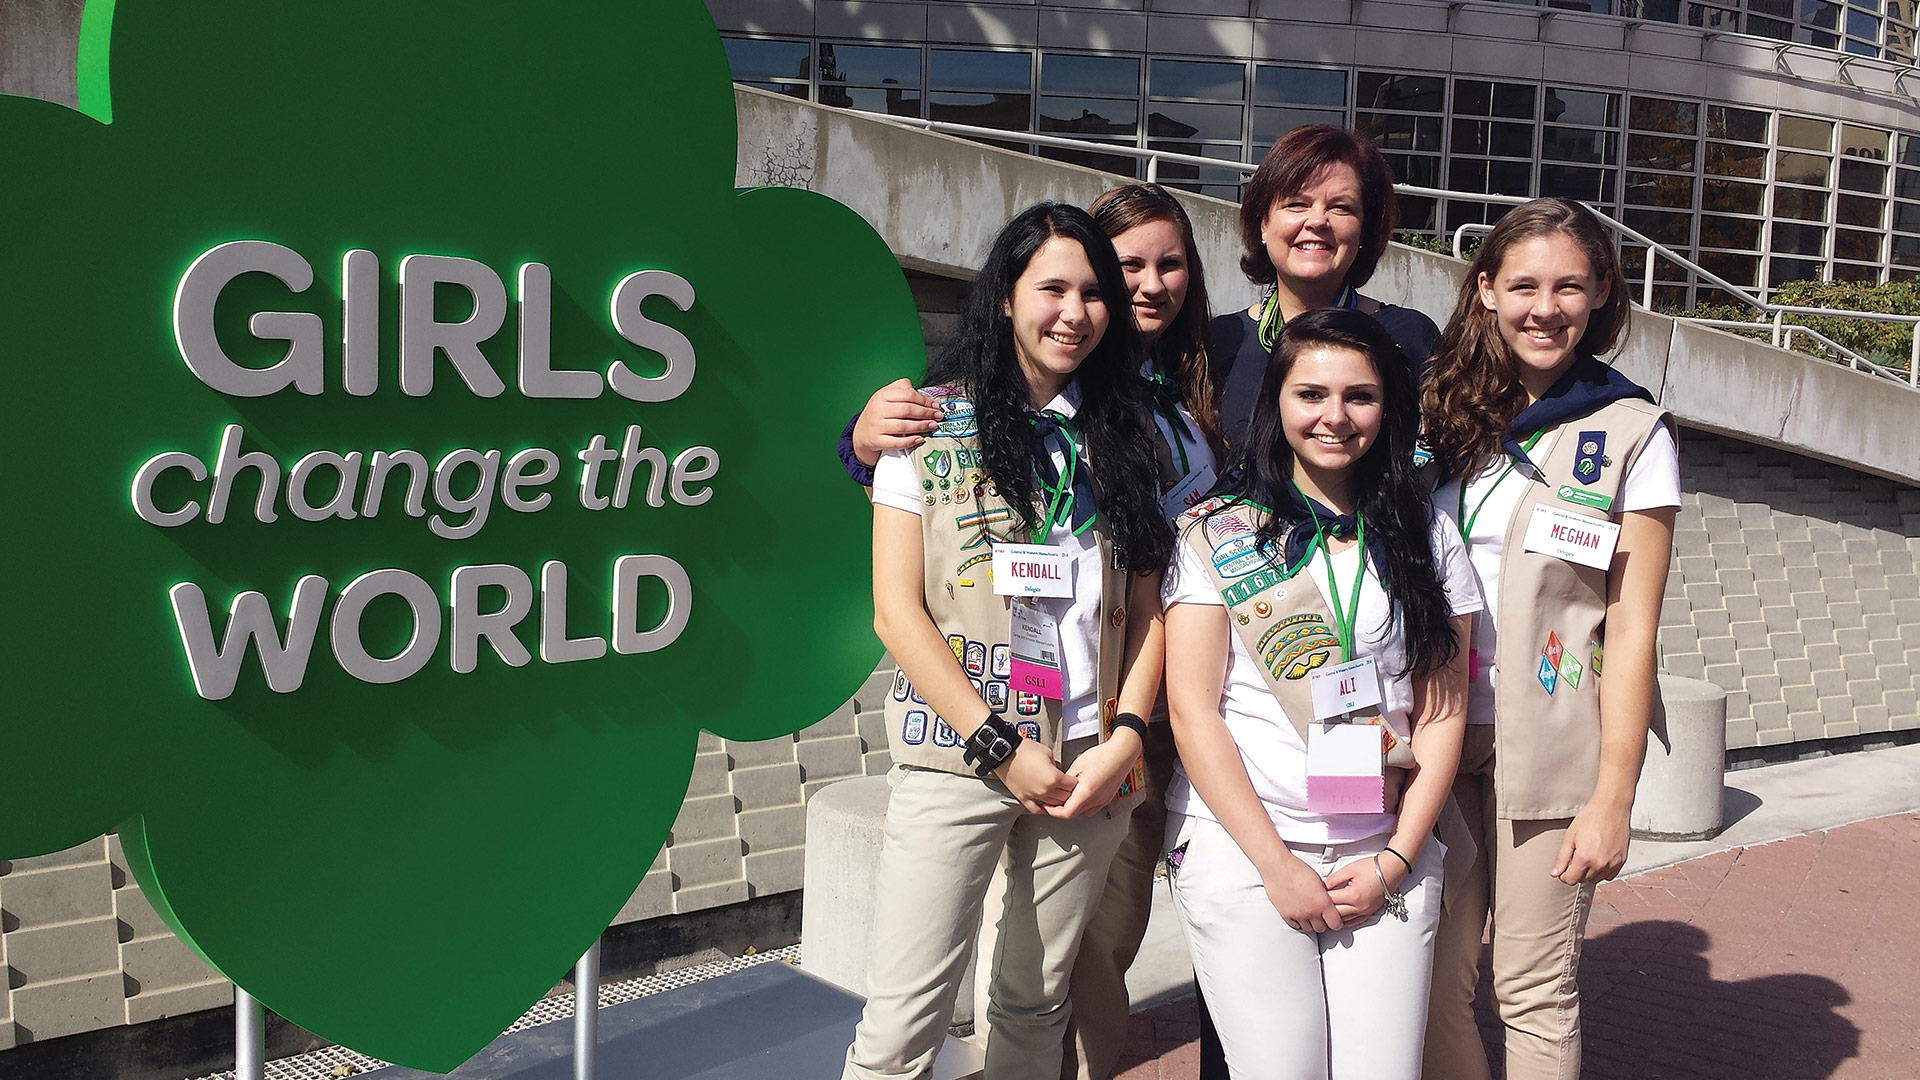 Pattie Hallberg has devoted much of her life to being an advocate for women and girls, especially in her current role with the Girl Scouts.